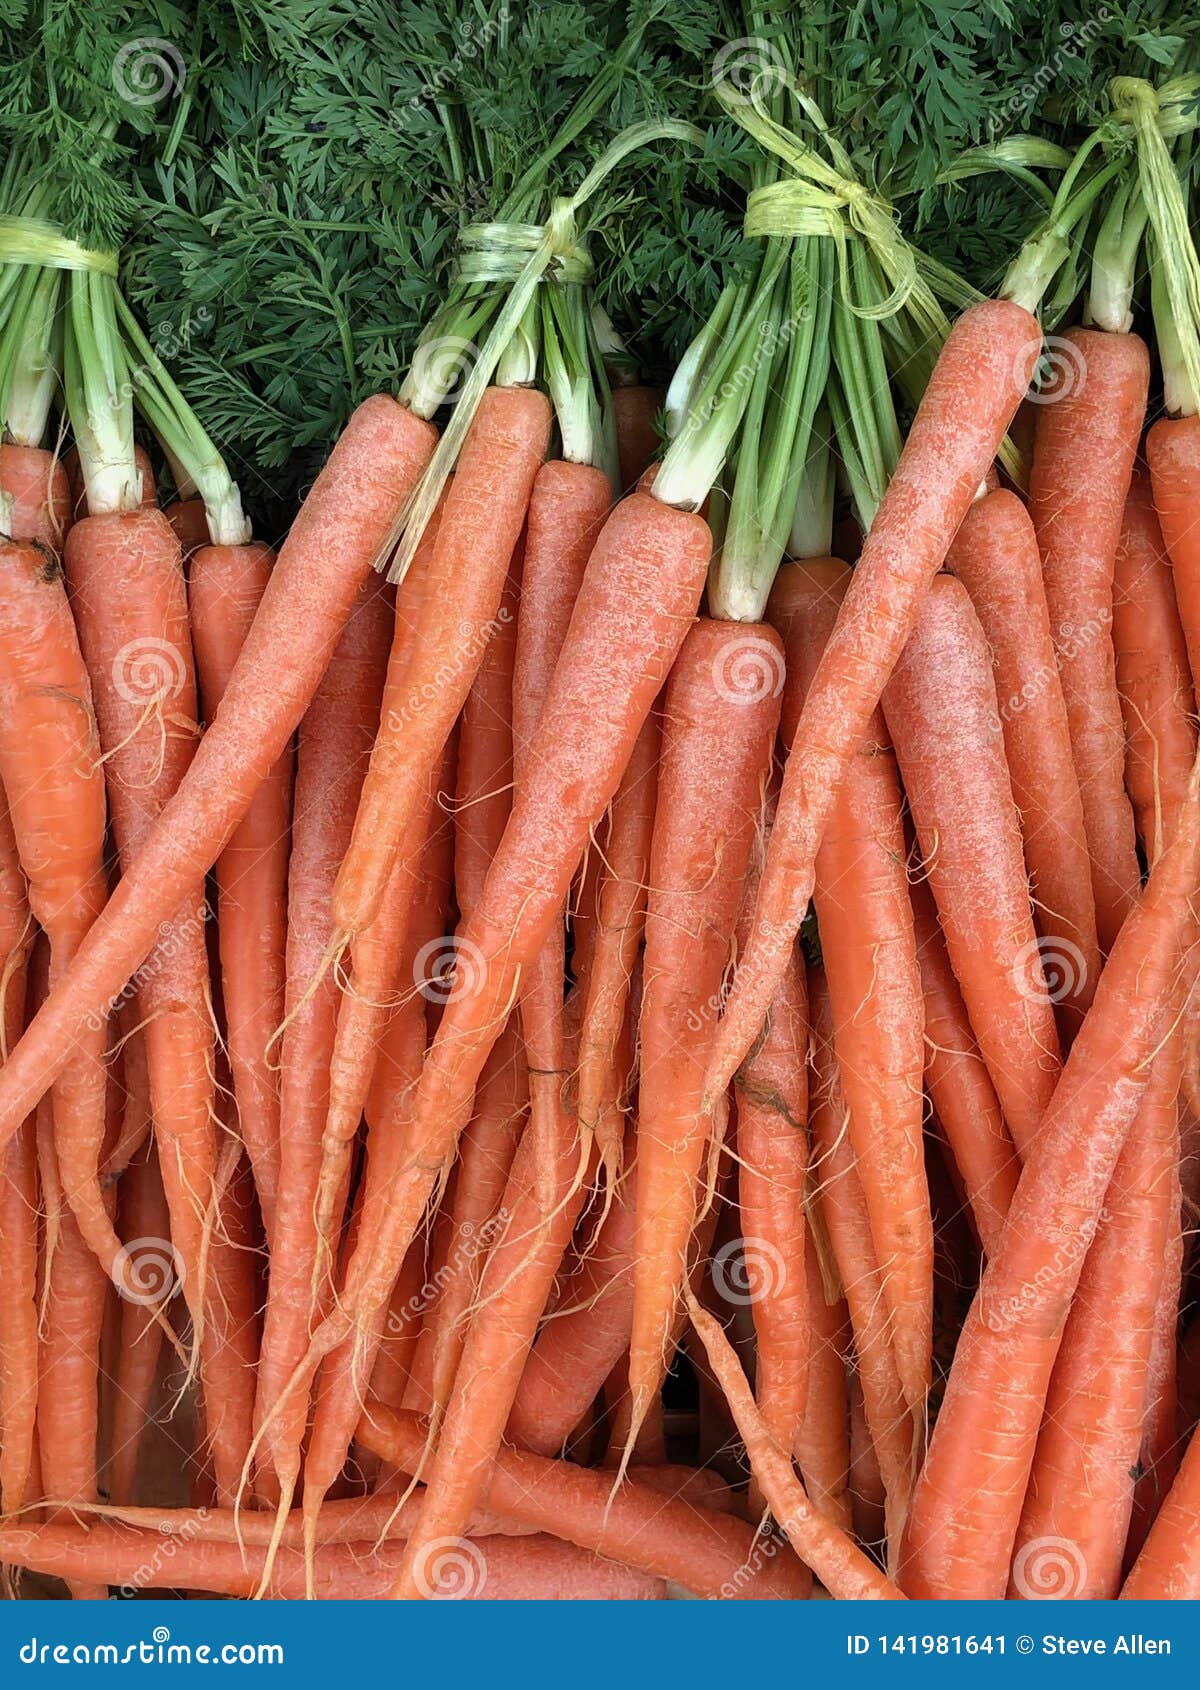 Organic Carrots for Sale at a Farmers Market Stock Image - Image of ...